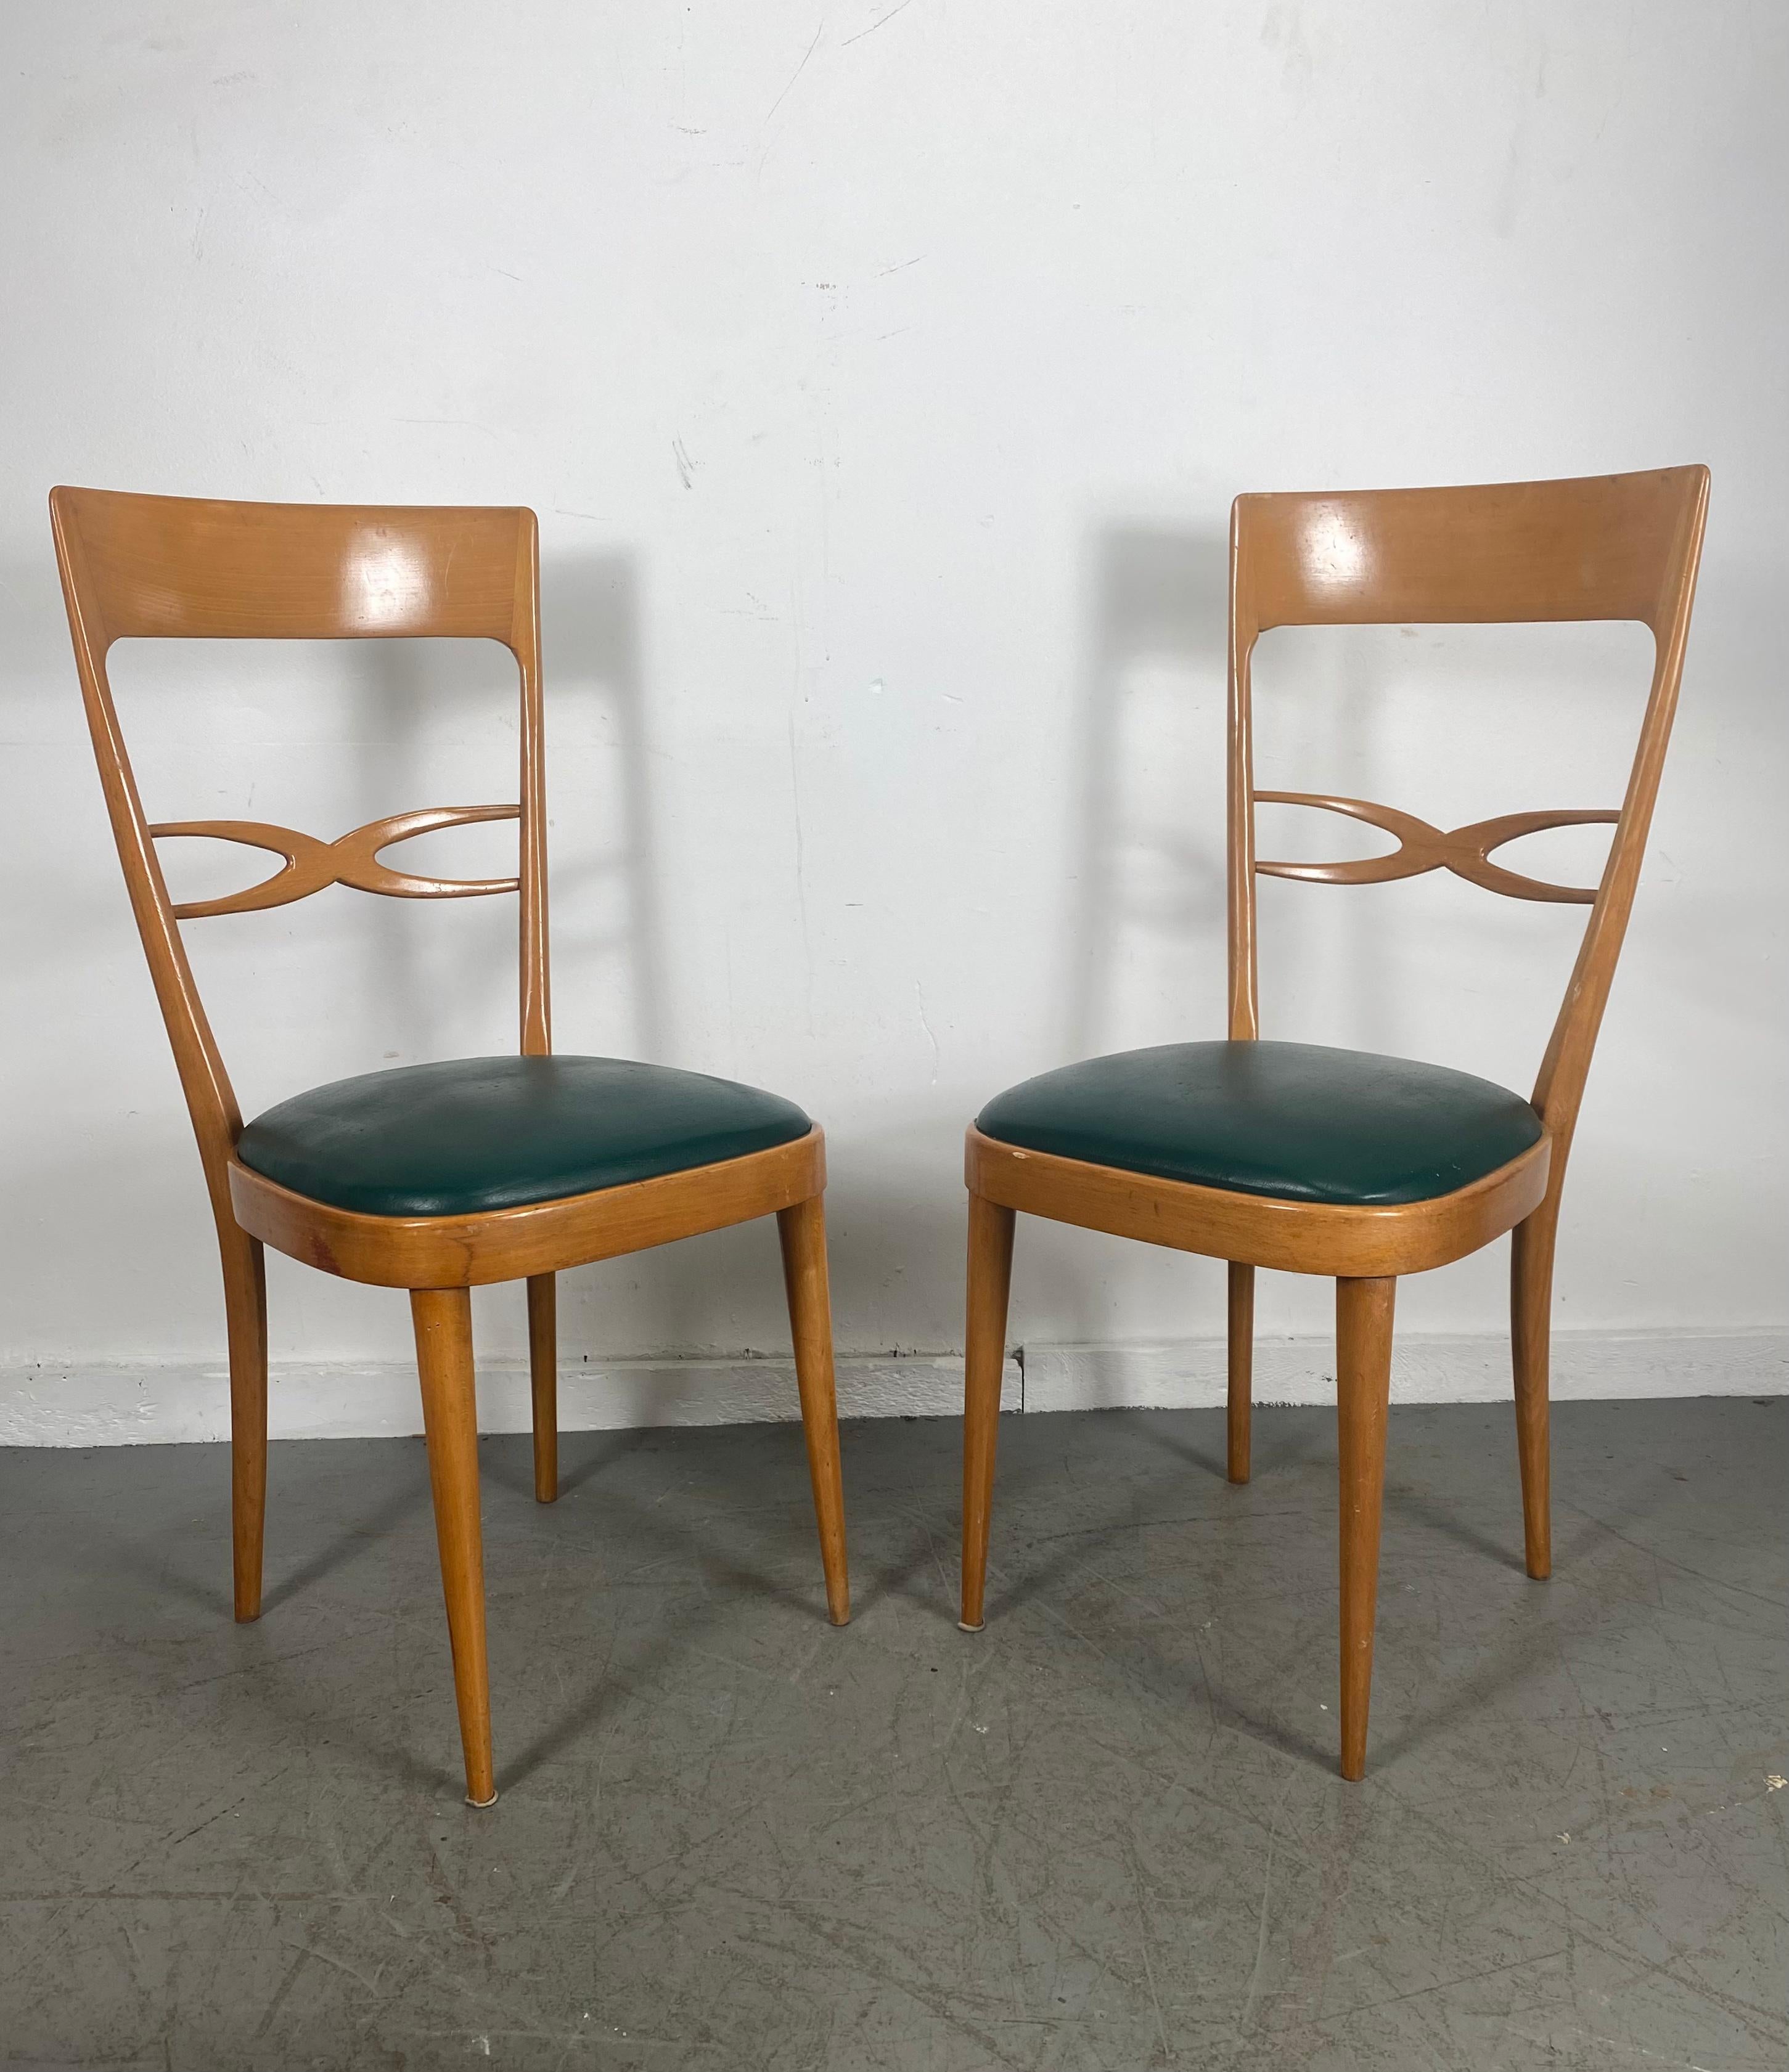 Set 6 Mid Century Modernist Italian Dining Chairs, Early 1950s, Beech Wood 3